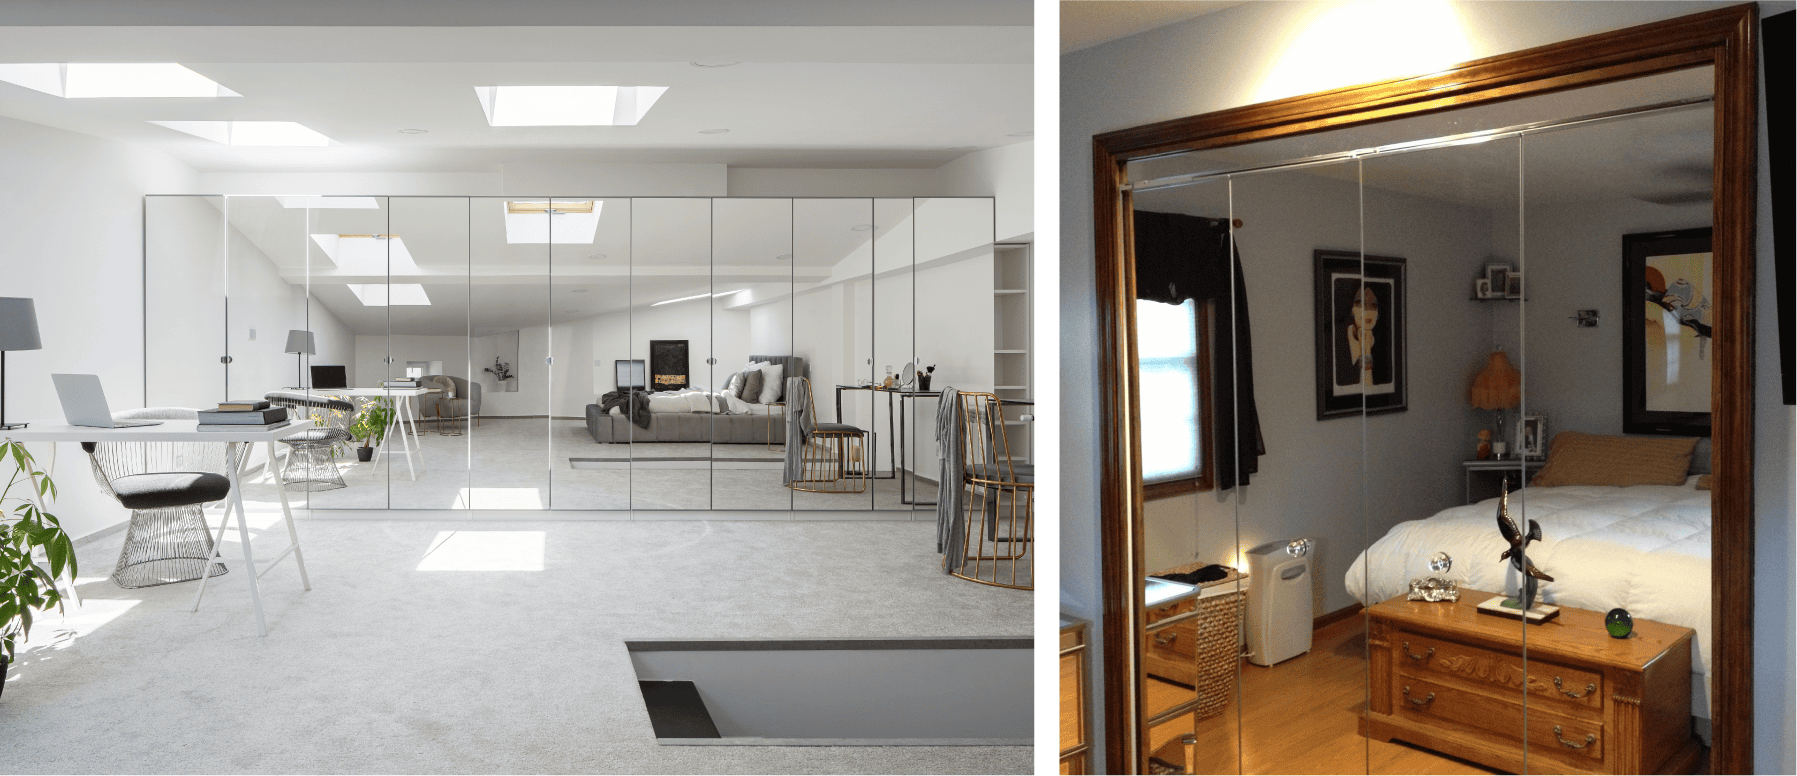 Two cozy rooms with mirror closet doors - a bedroom and a living room.